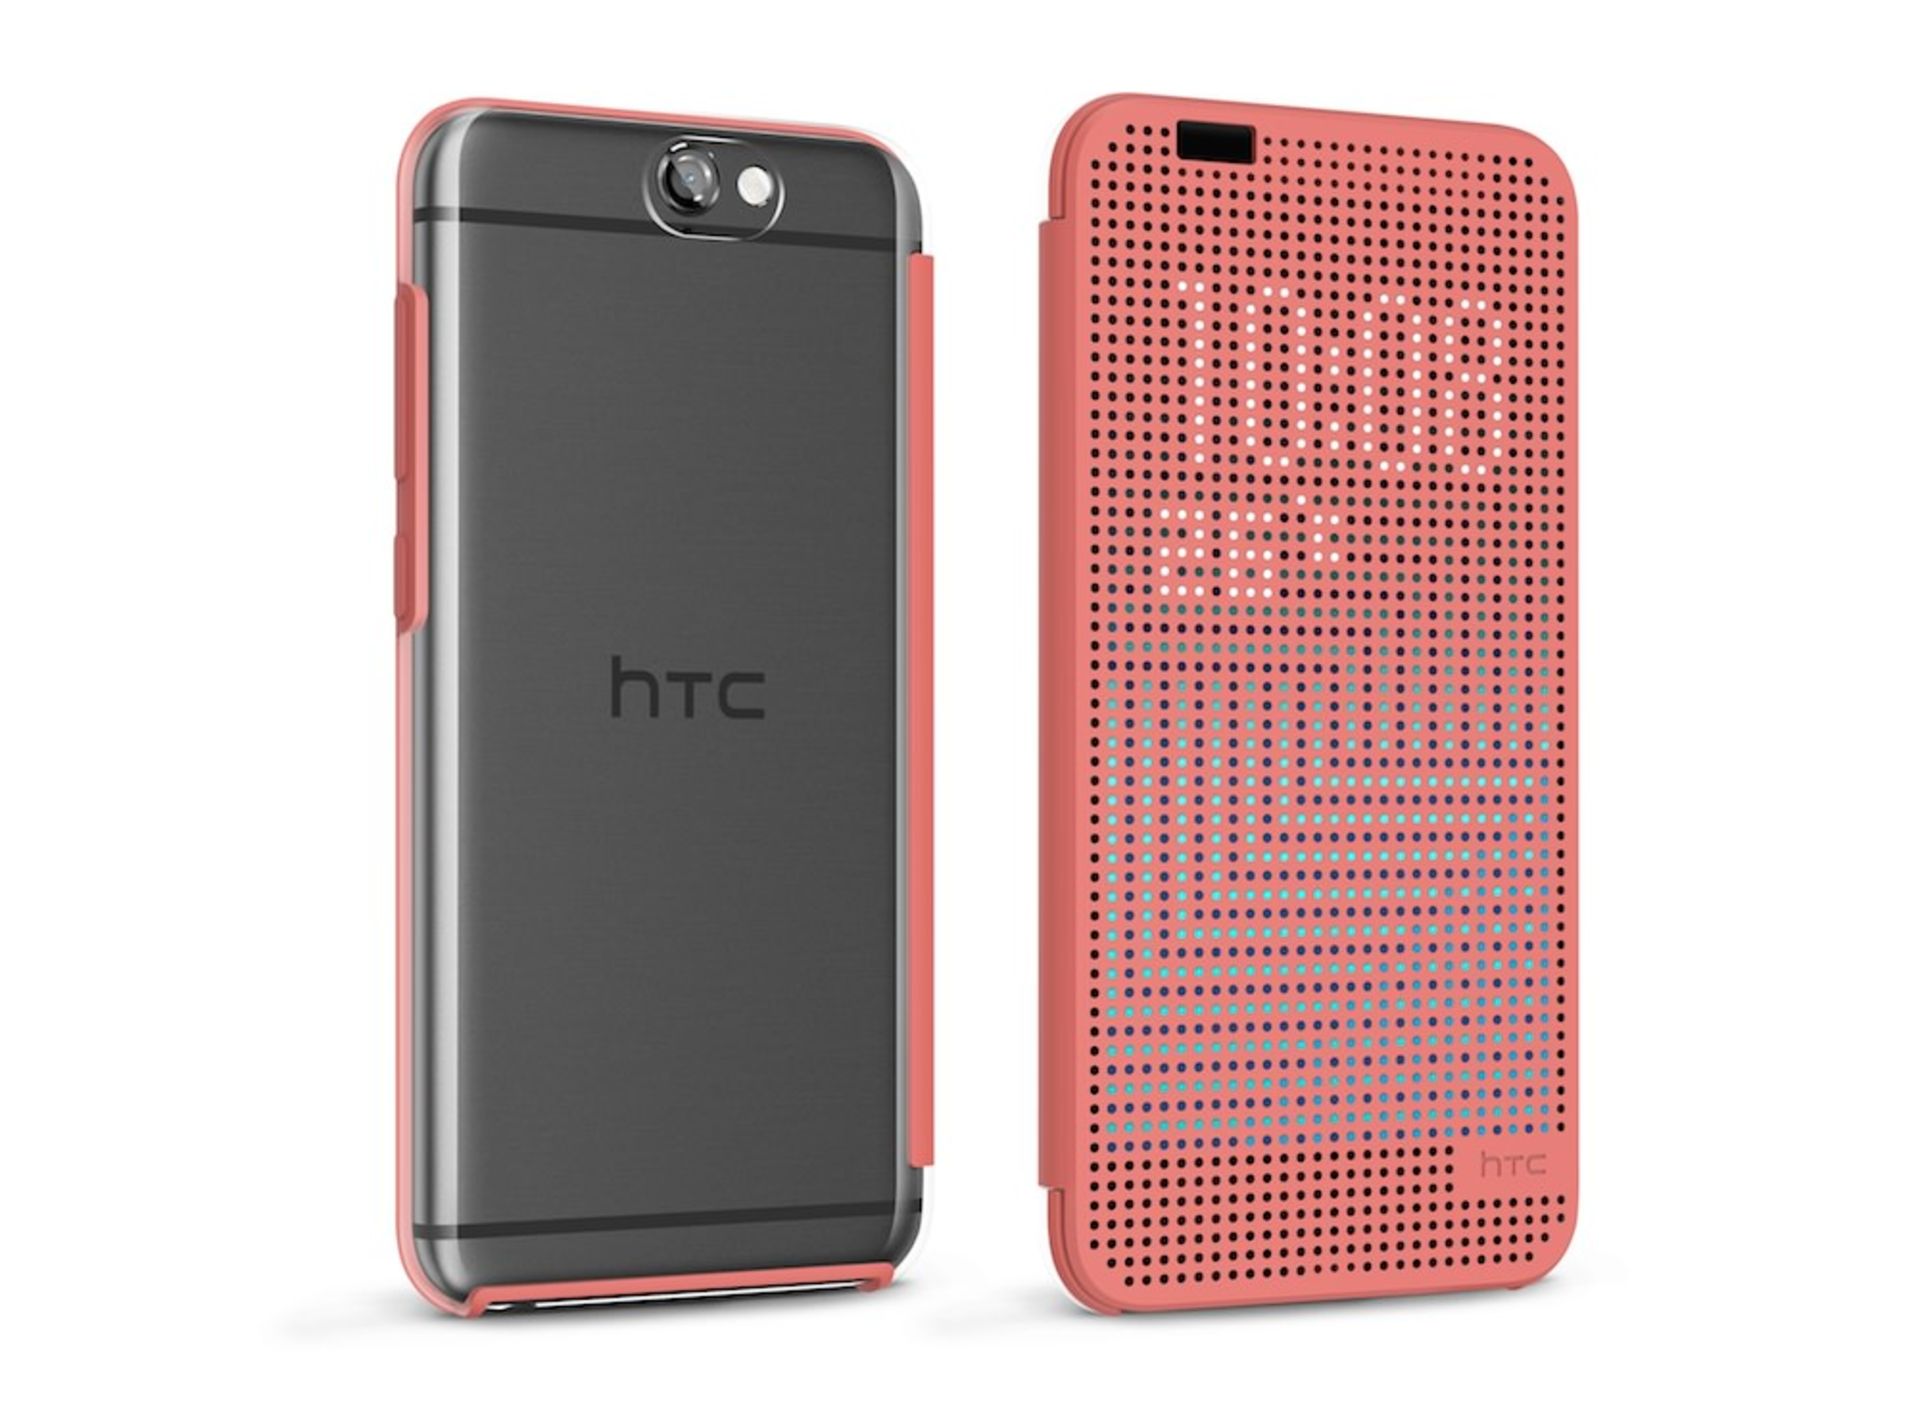 HTC One A9 official image4s